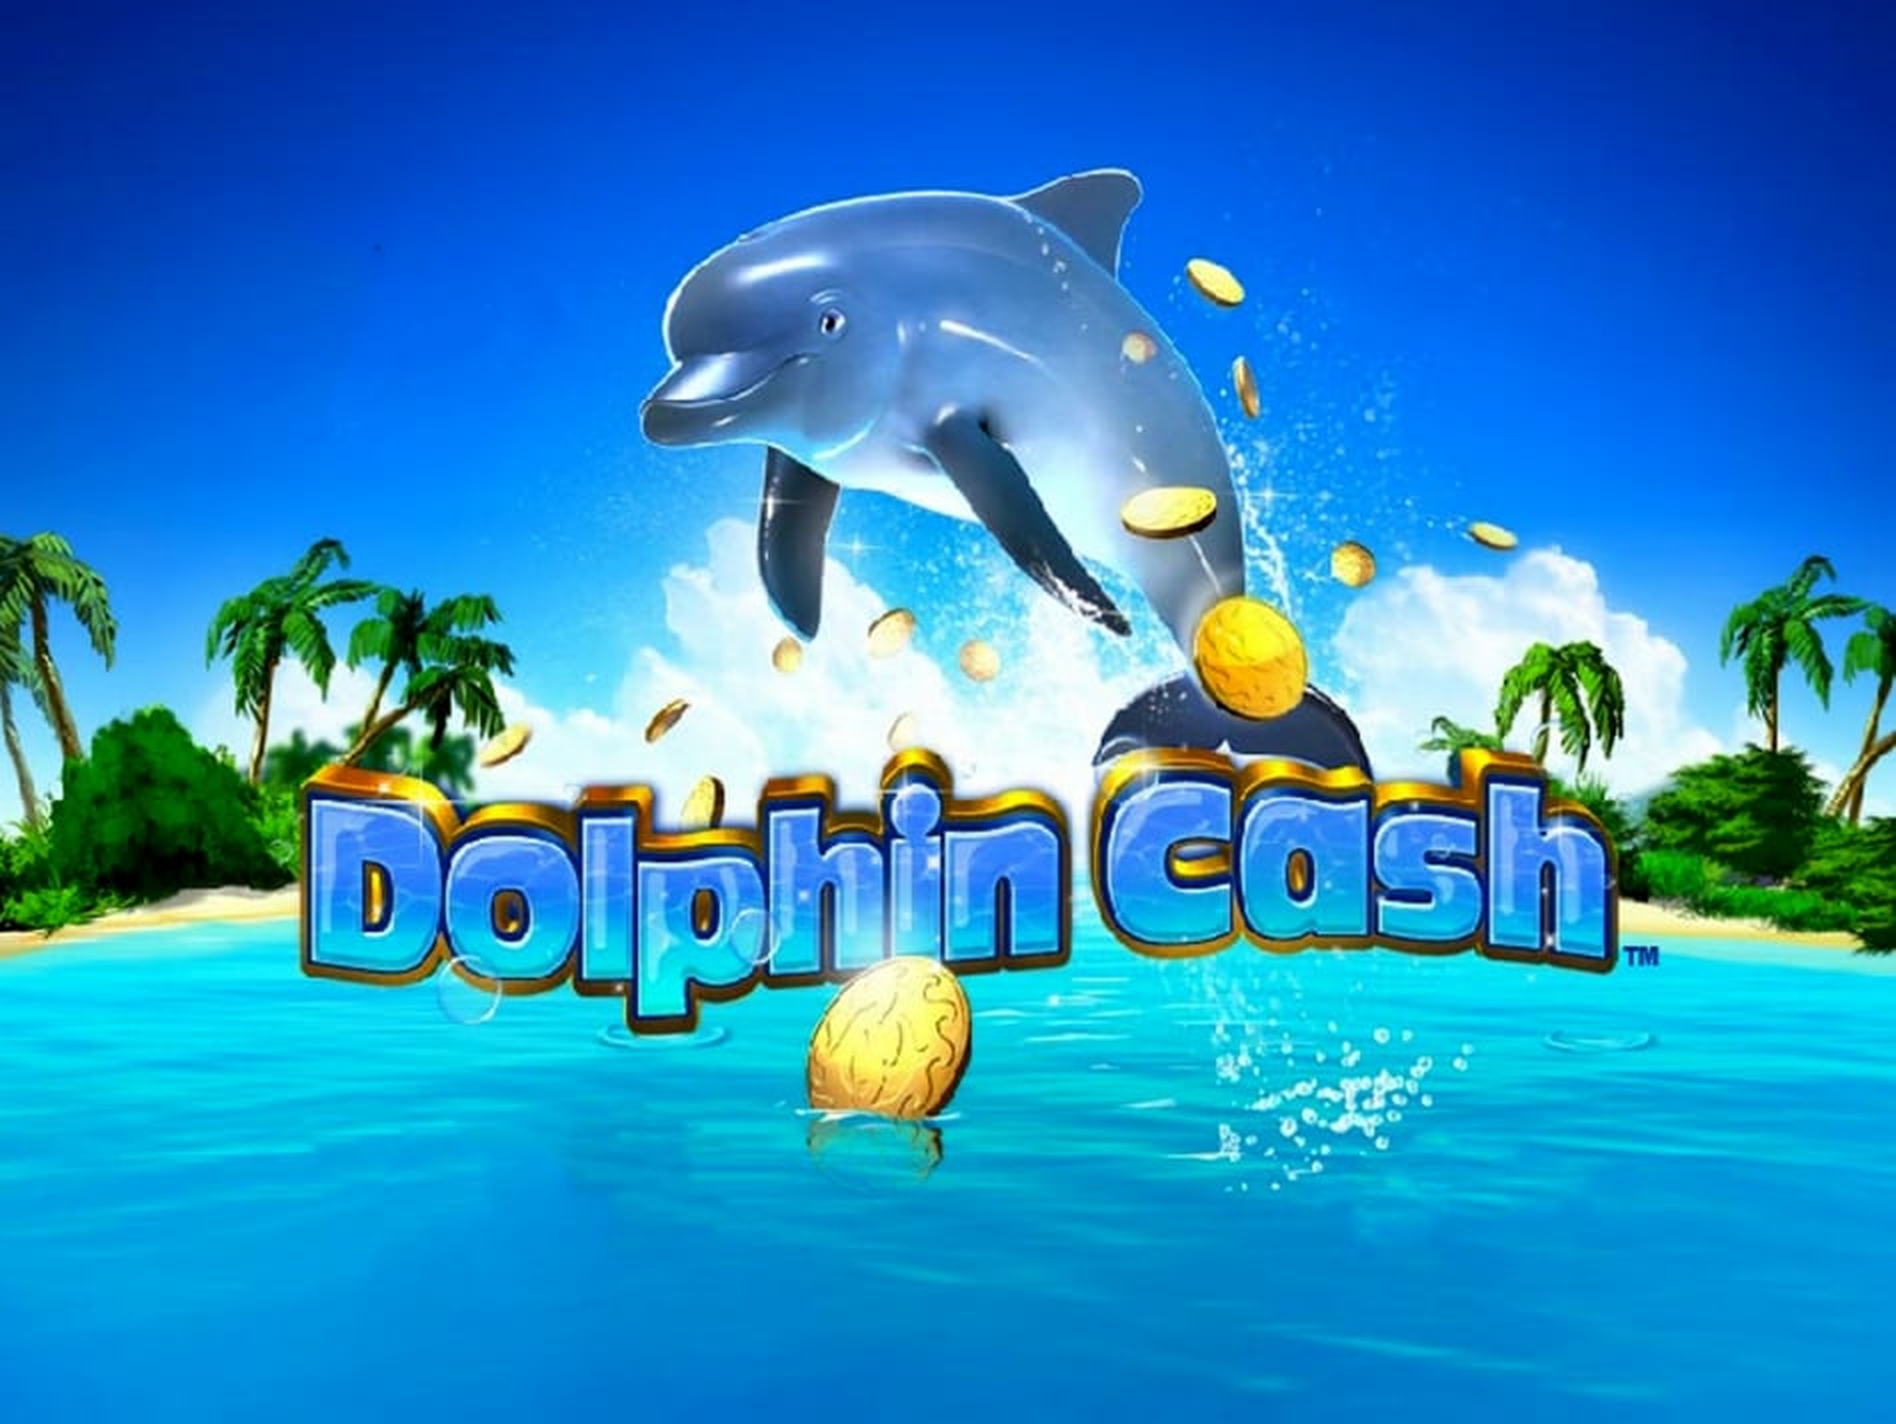 The Dolphin Cash Scratch Online Slot Demo Game by Playtech